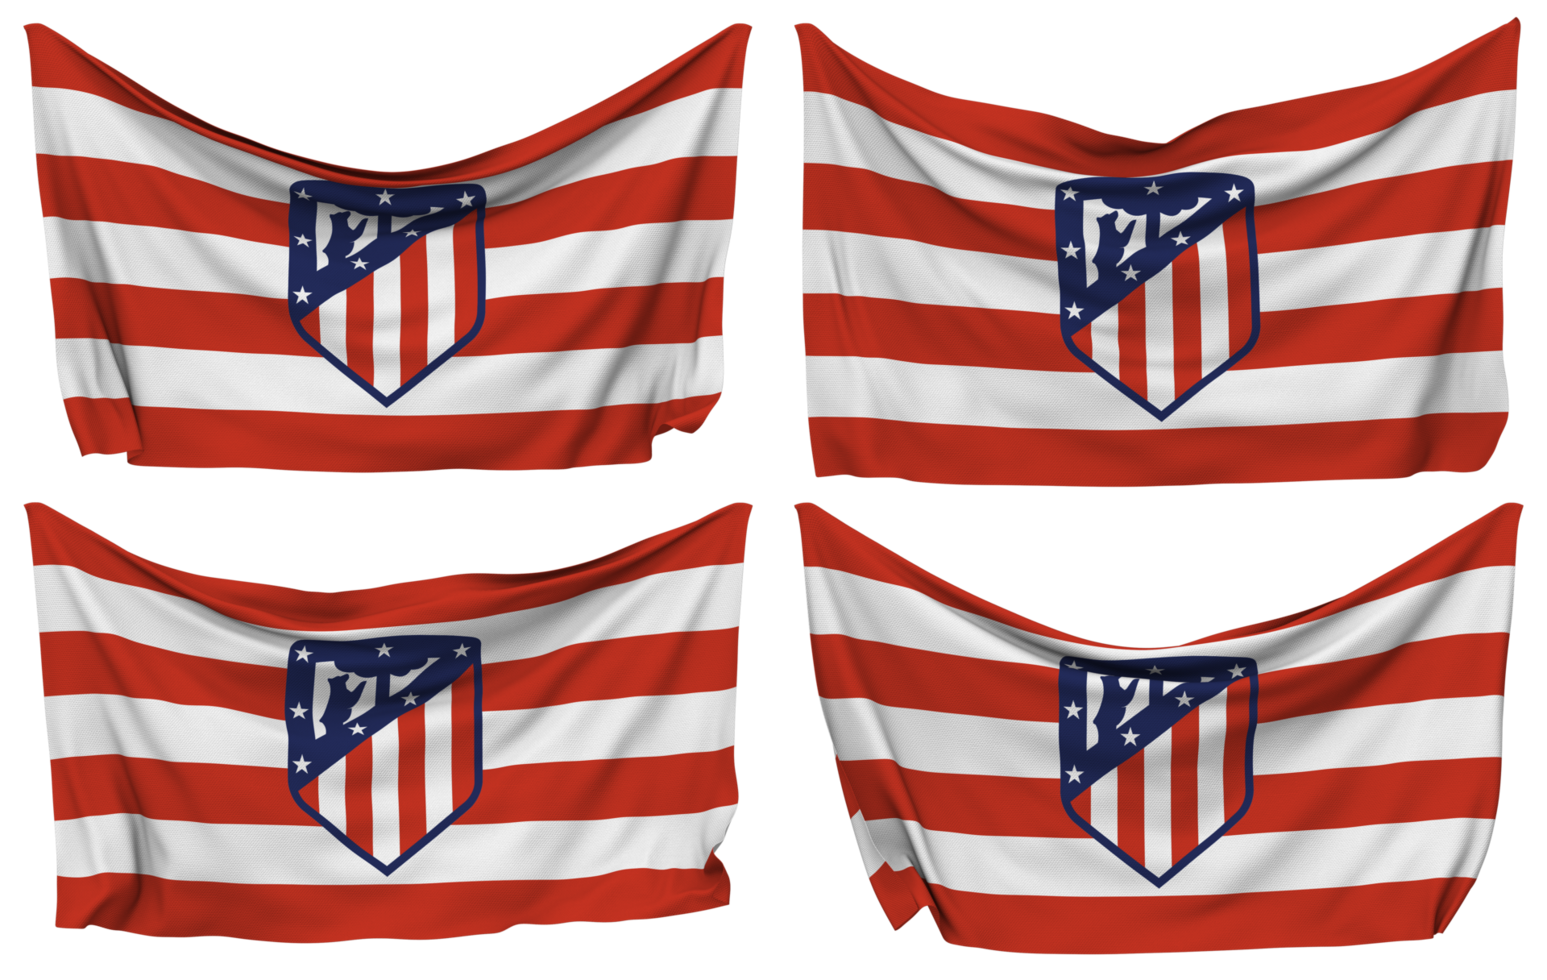 Club Atletico de Madrid Football Club Pinned Flag from Corners, Isolated with Different Waving Variations, 3D Rendering png